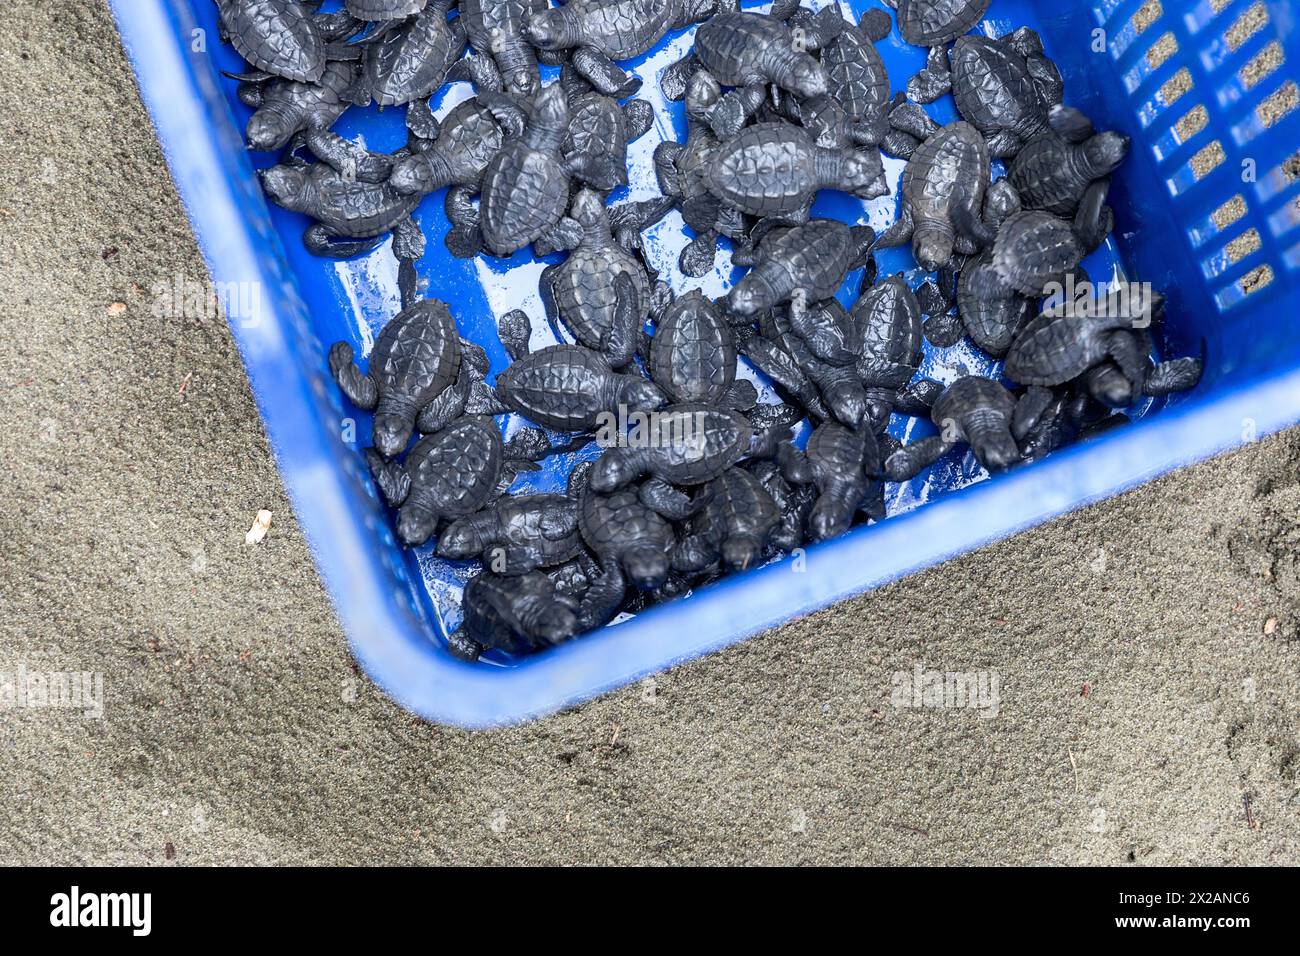 Baby Olive ridley turtles (Lepidochelys olivacea) or Laura turtles in plastic box prepared for release on Isla damas island in Costa rica Stock Photo